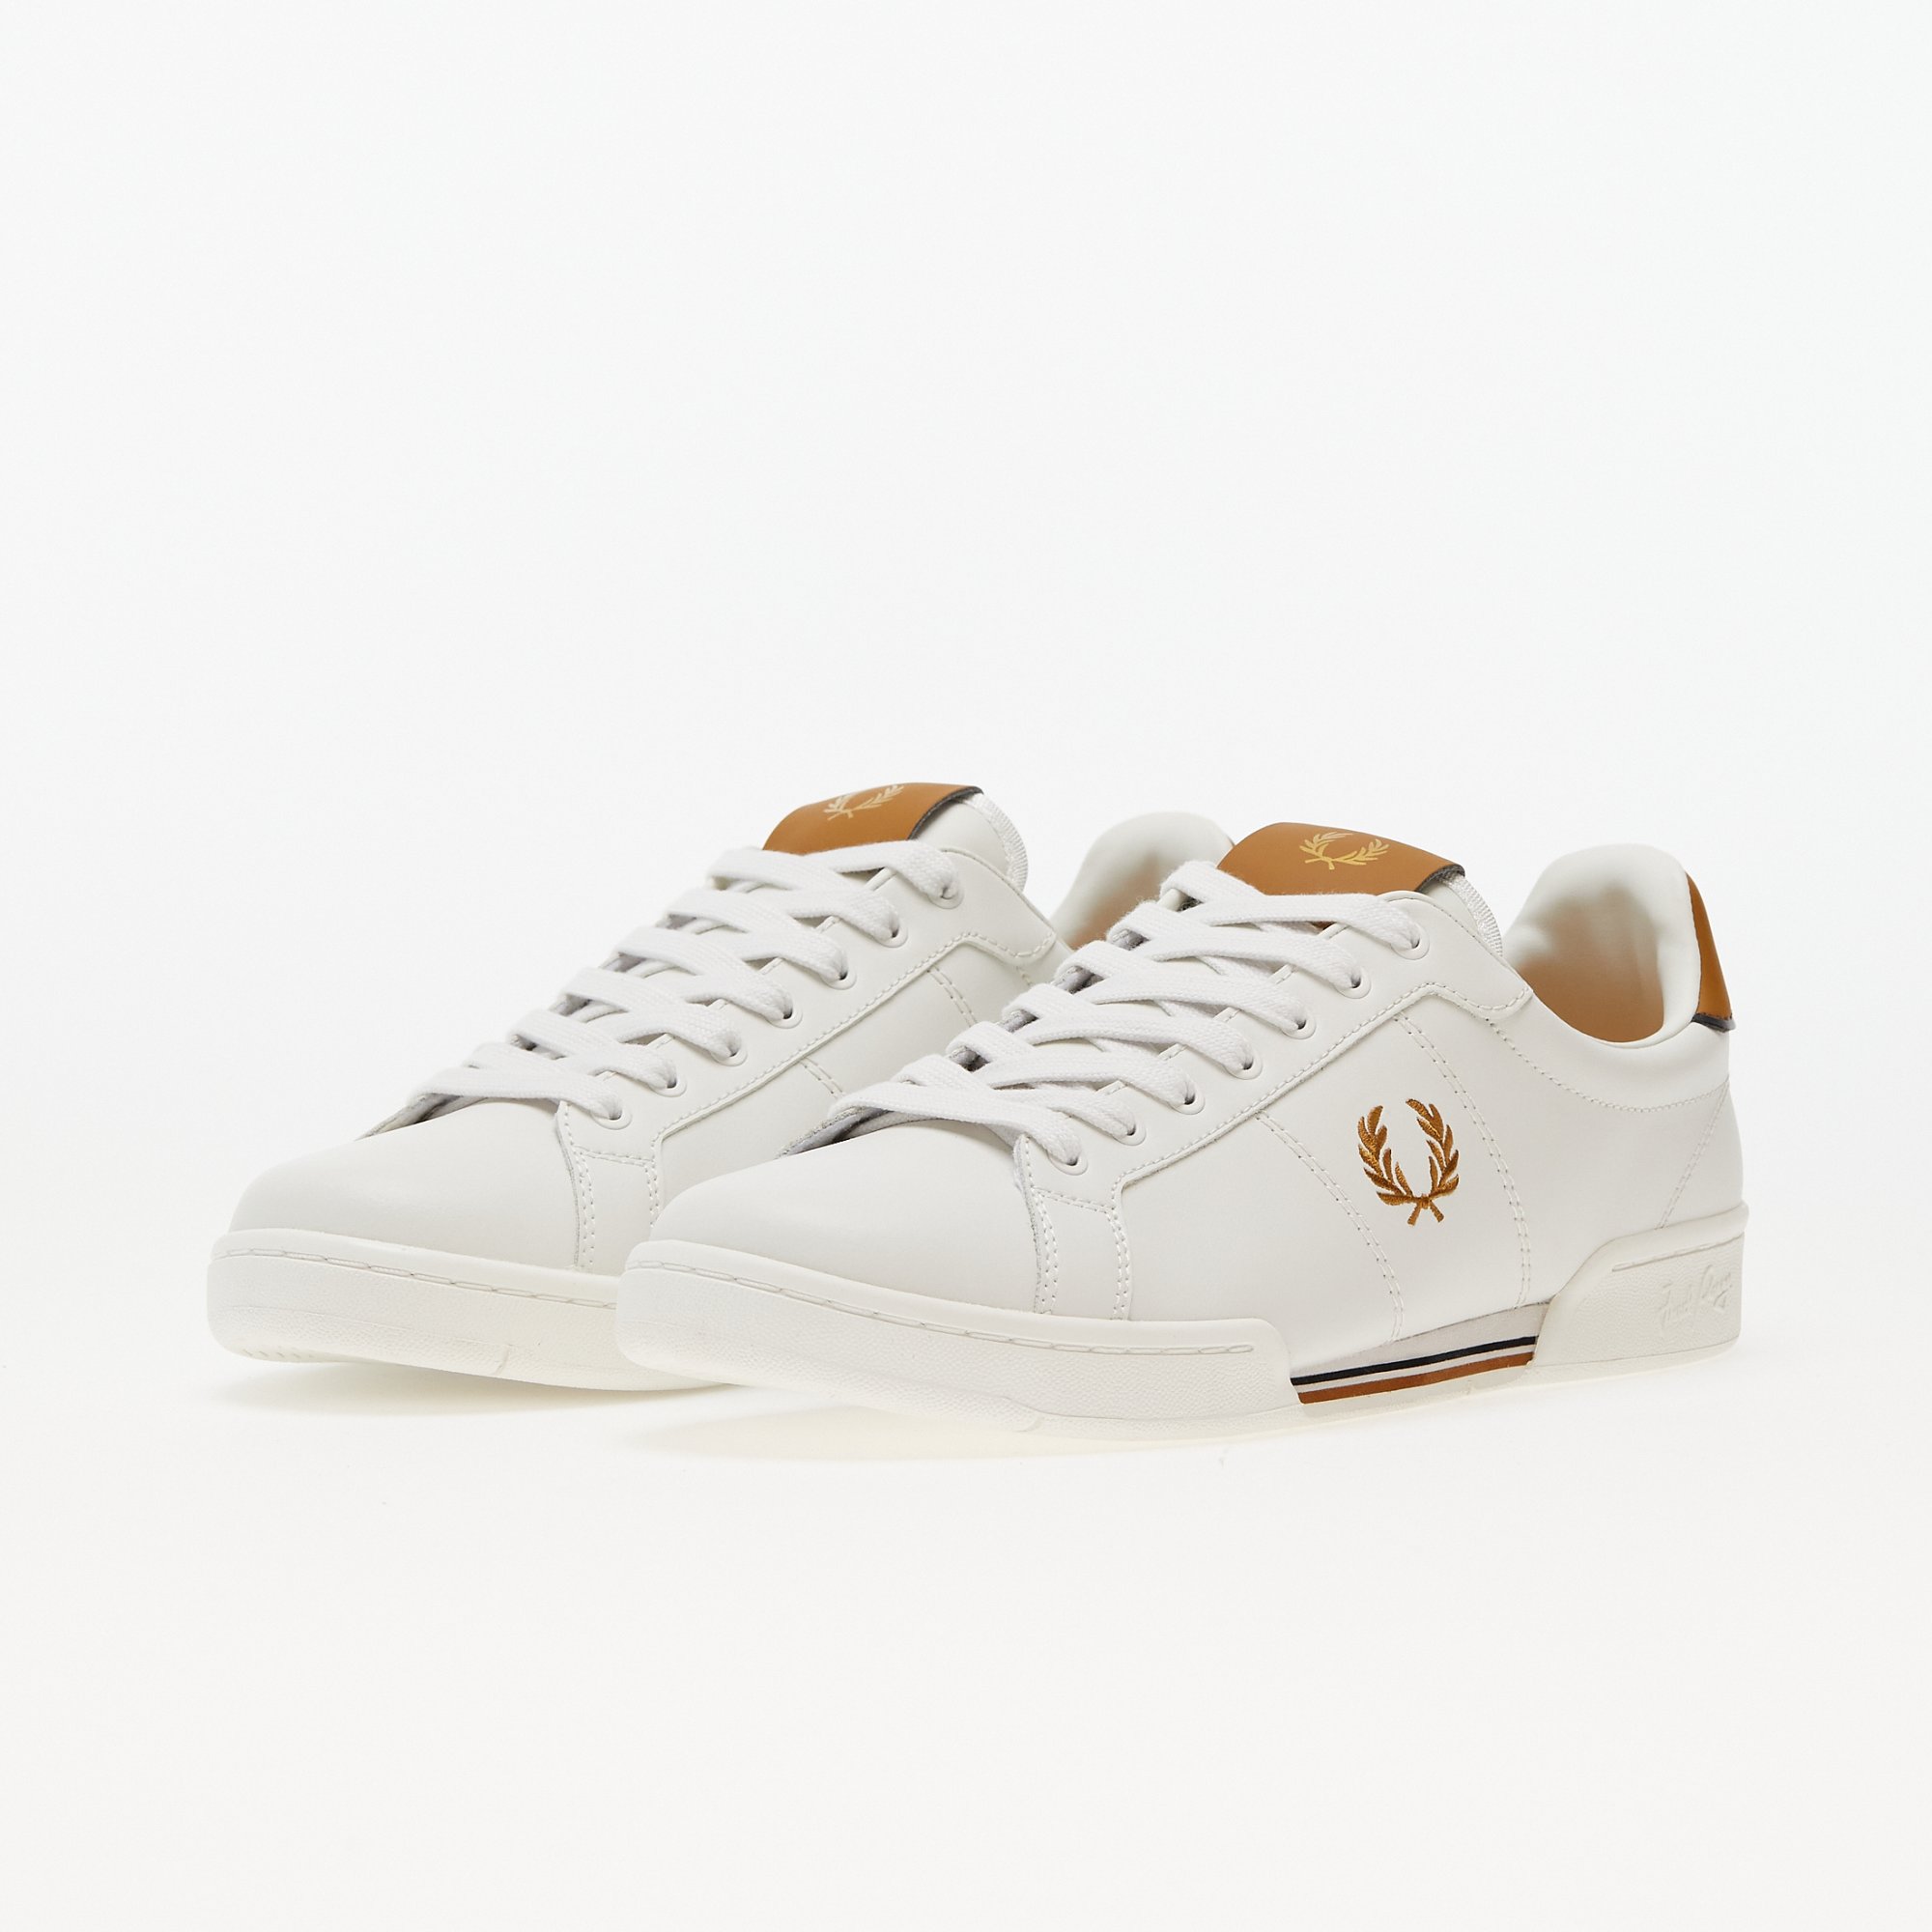 FRED PERRY B722 Leather porcelain Fred Perry